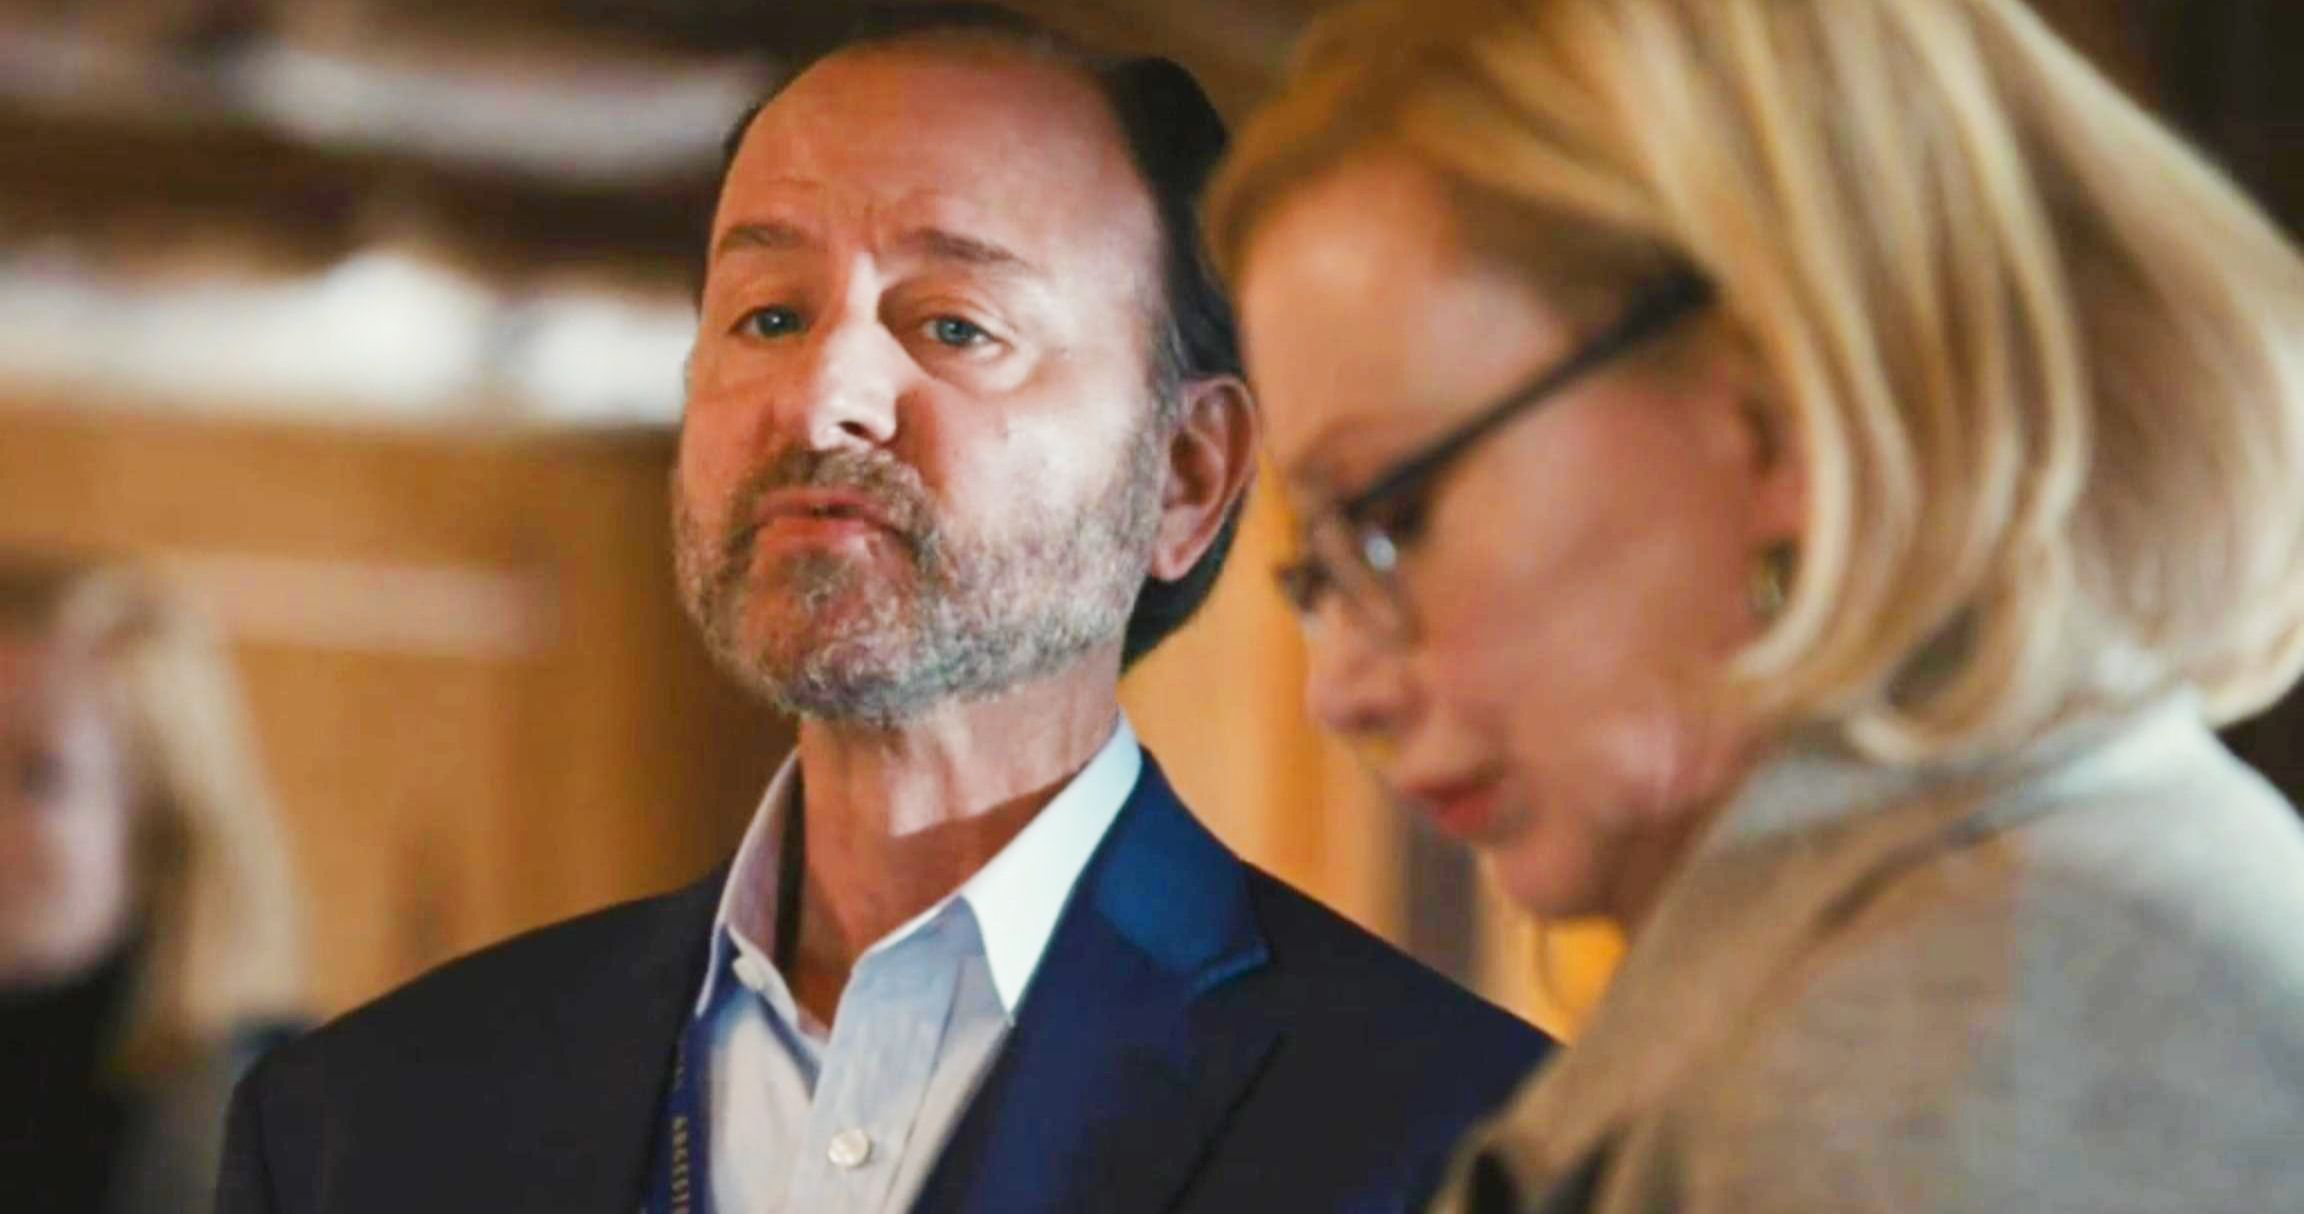 Fisher Stevens Steps Out from Behind the Camera, Now He's Reeling in the Roles